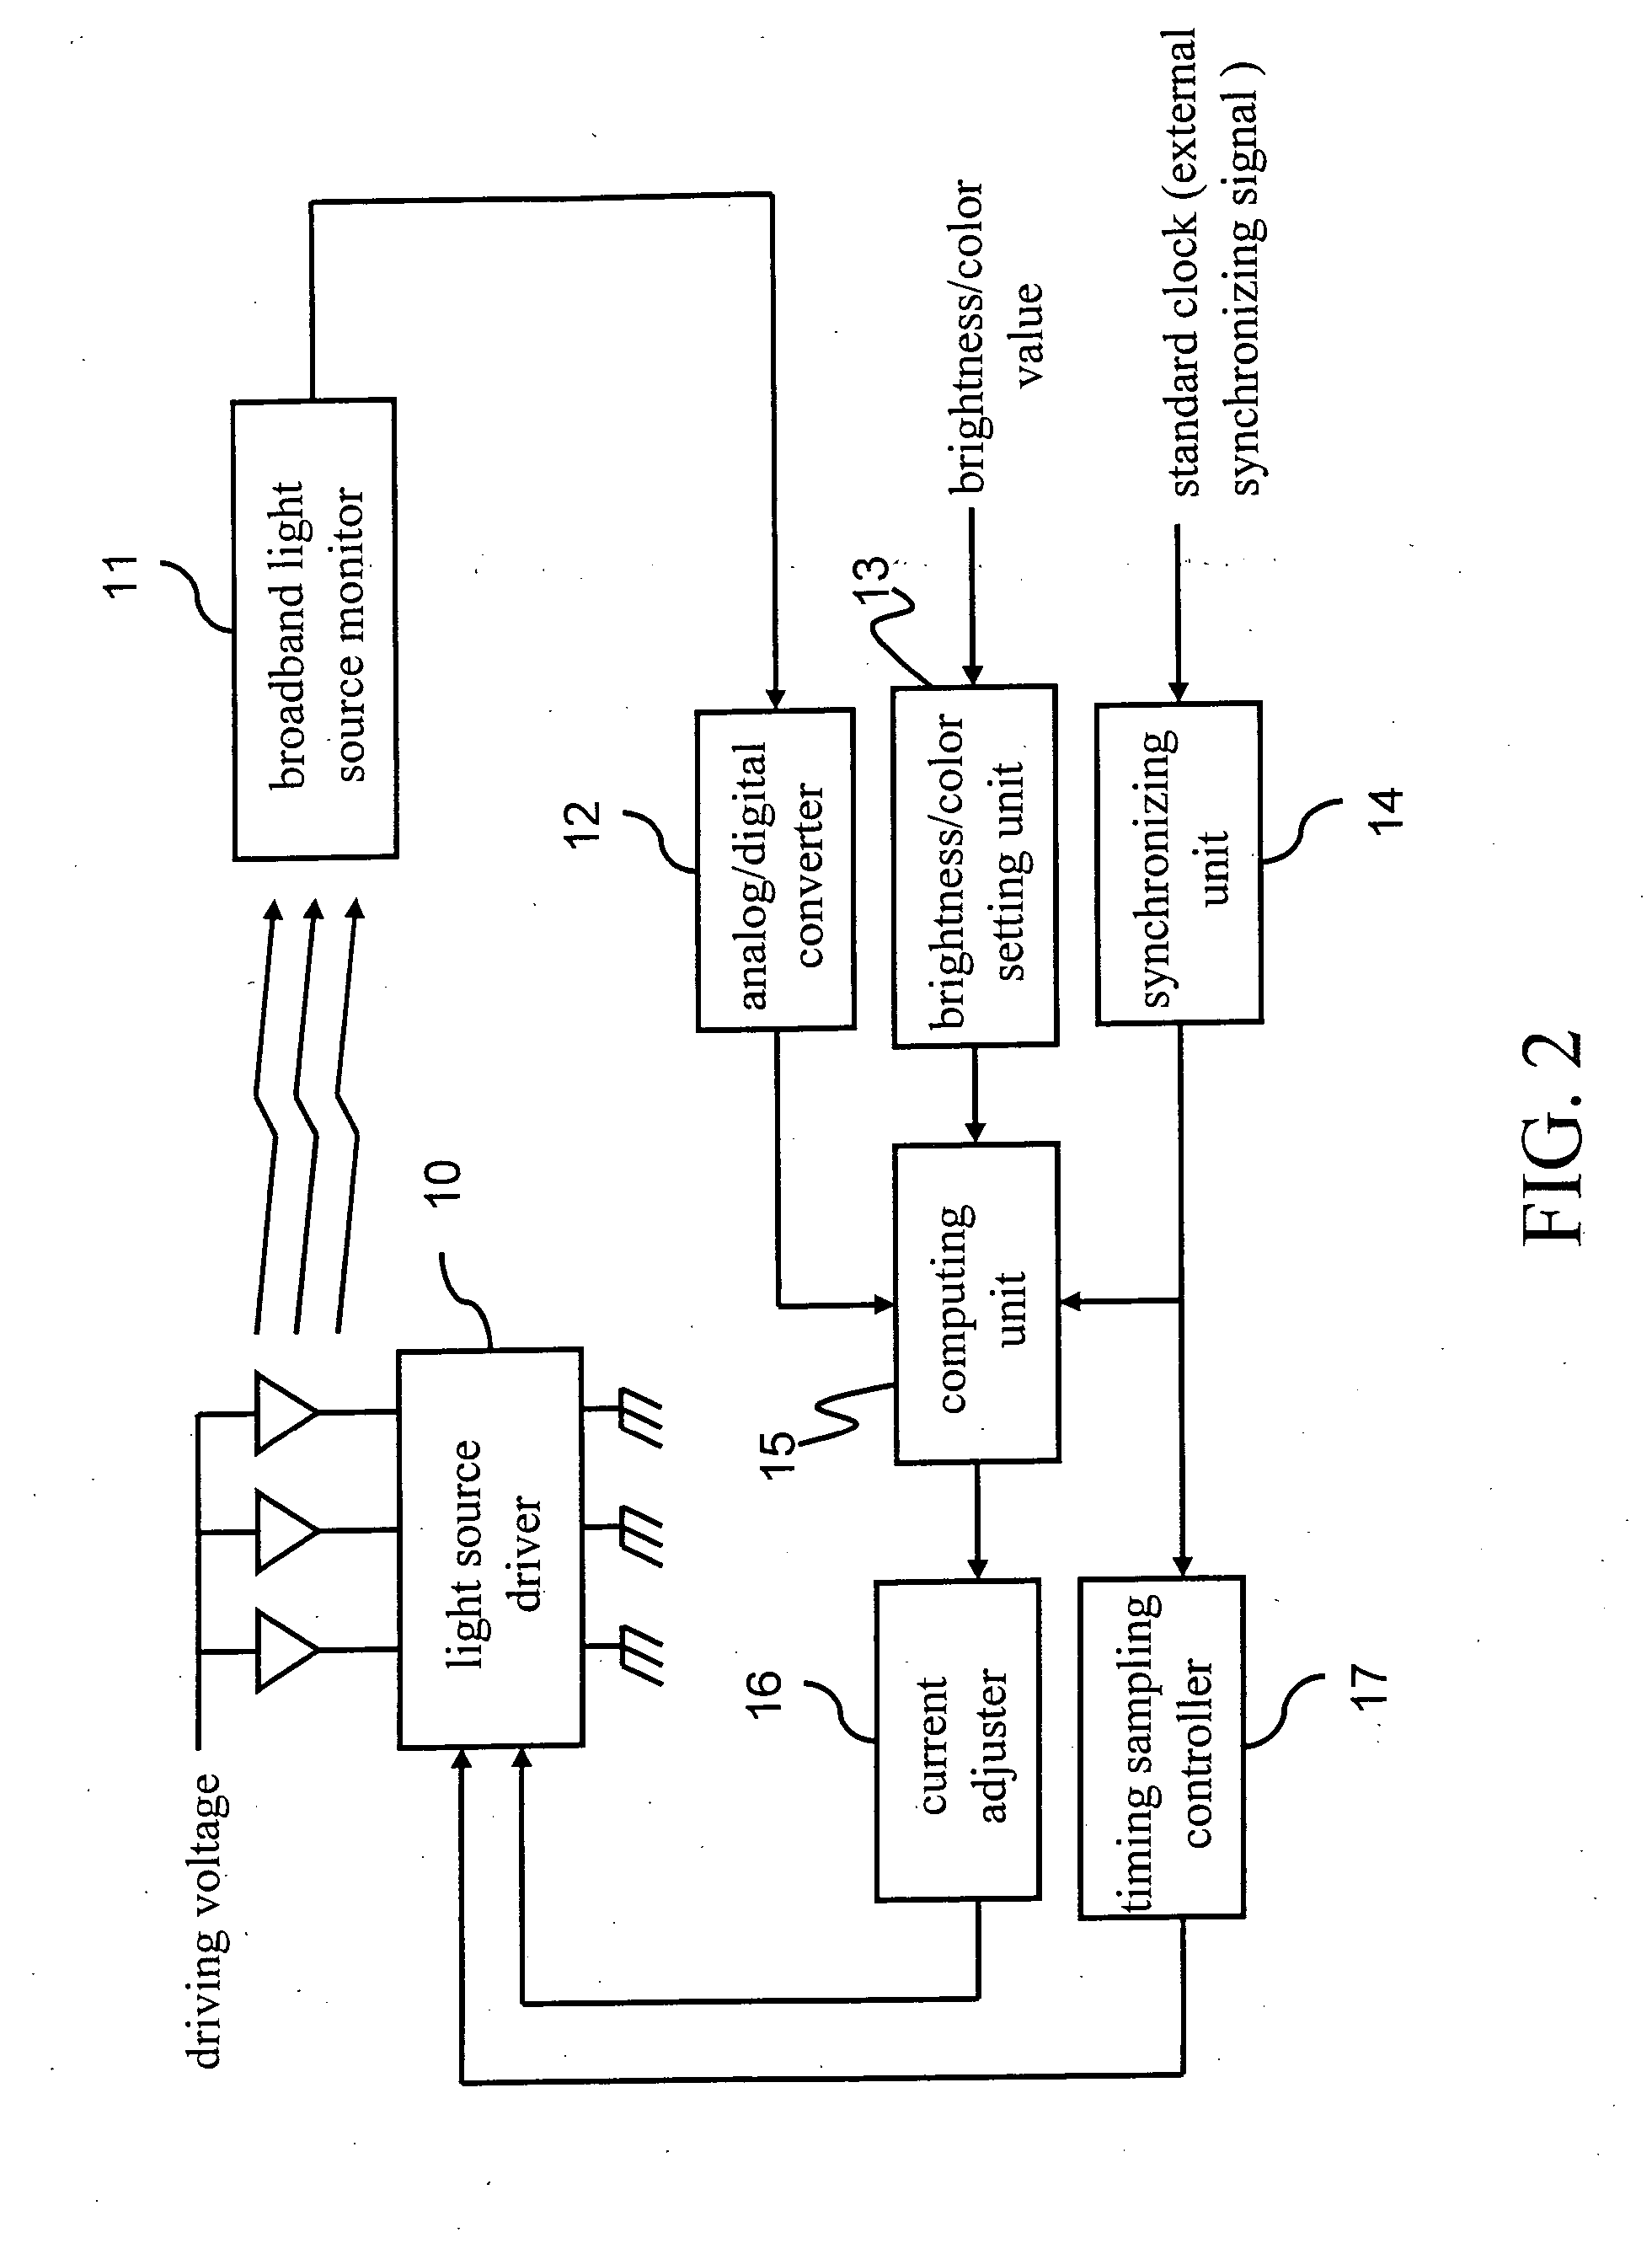 Illumination brightness and color control system and method therefor